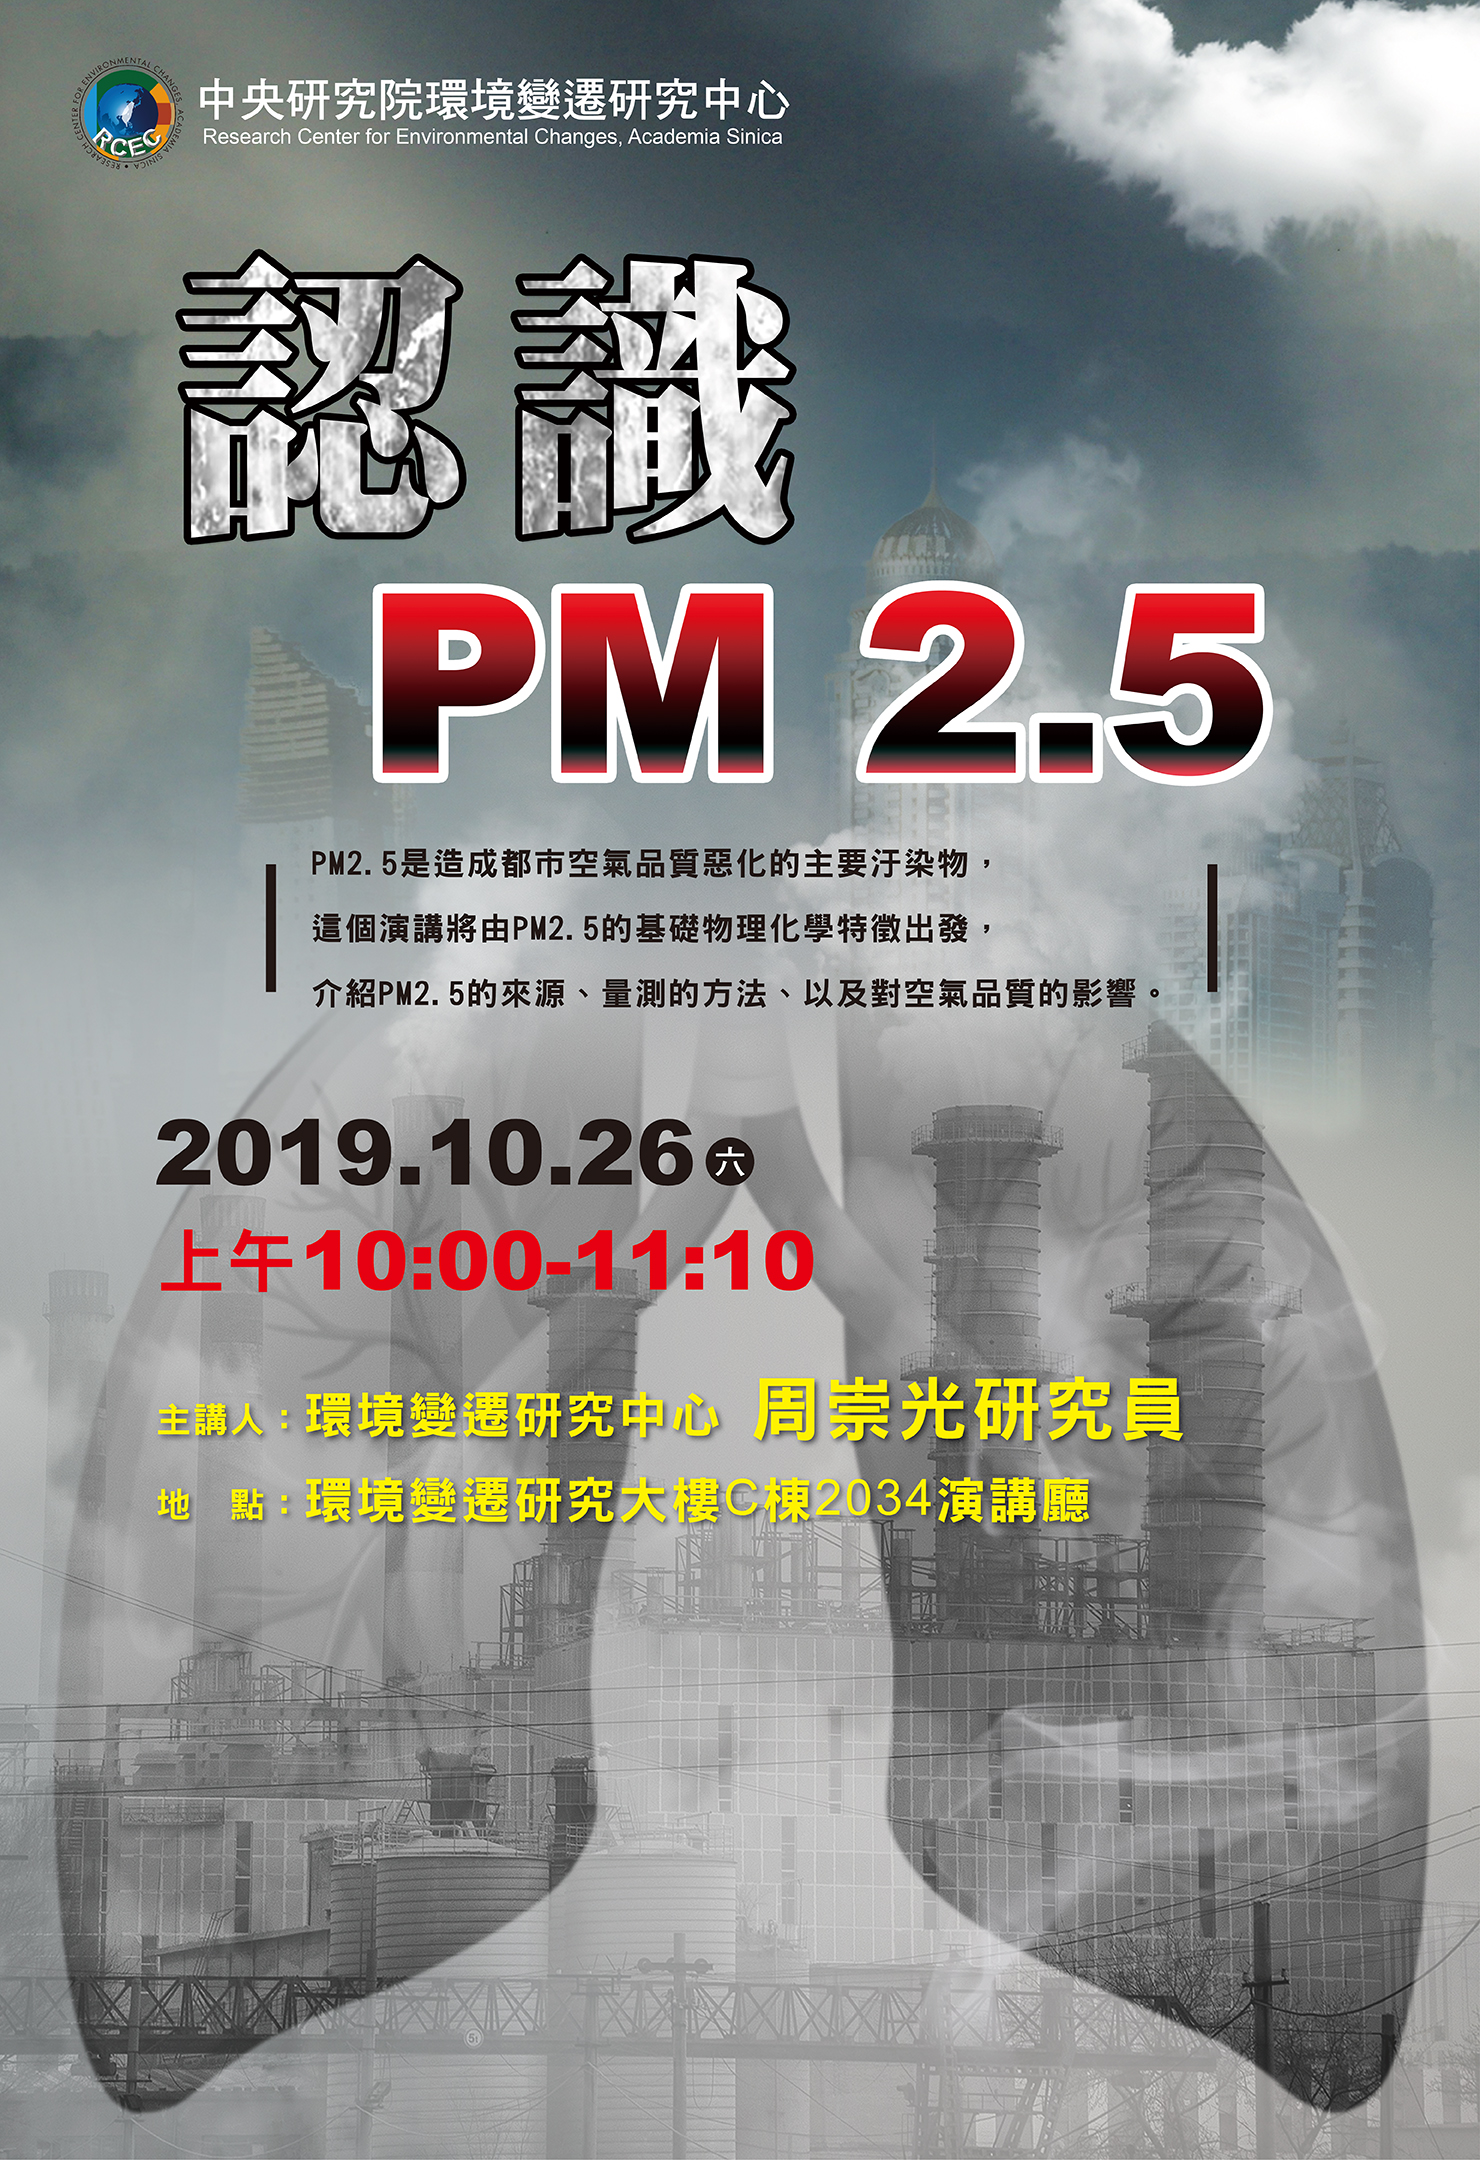 An introduction of PM2.5